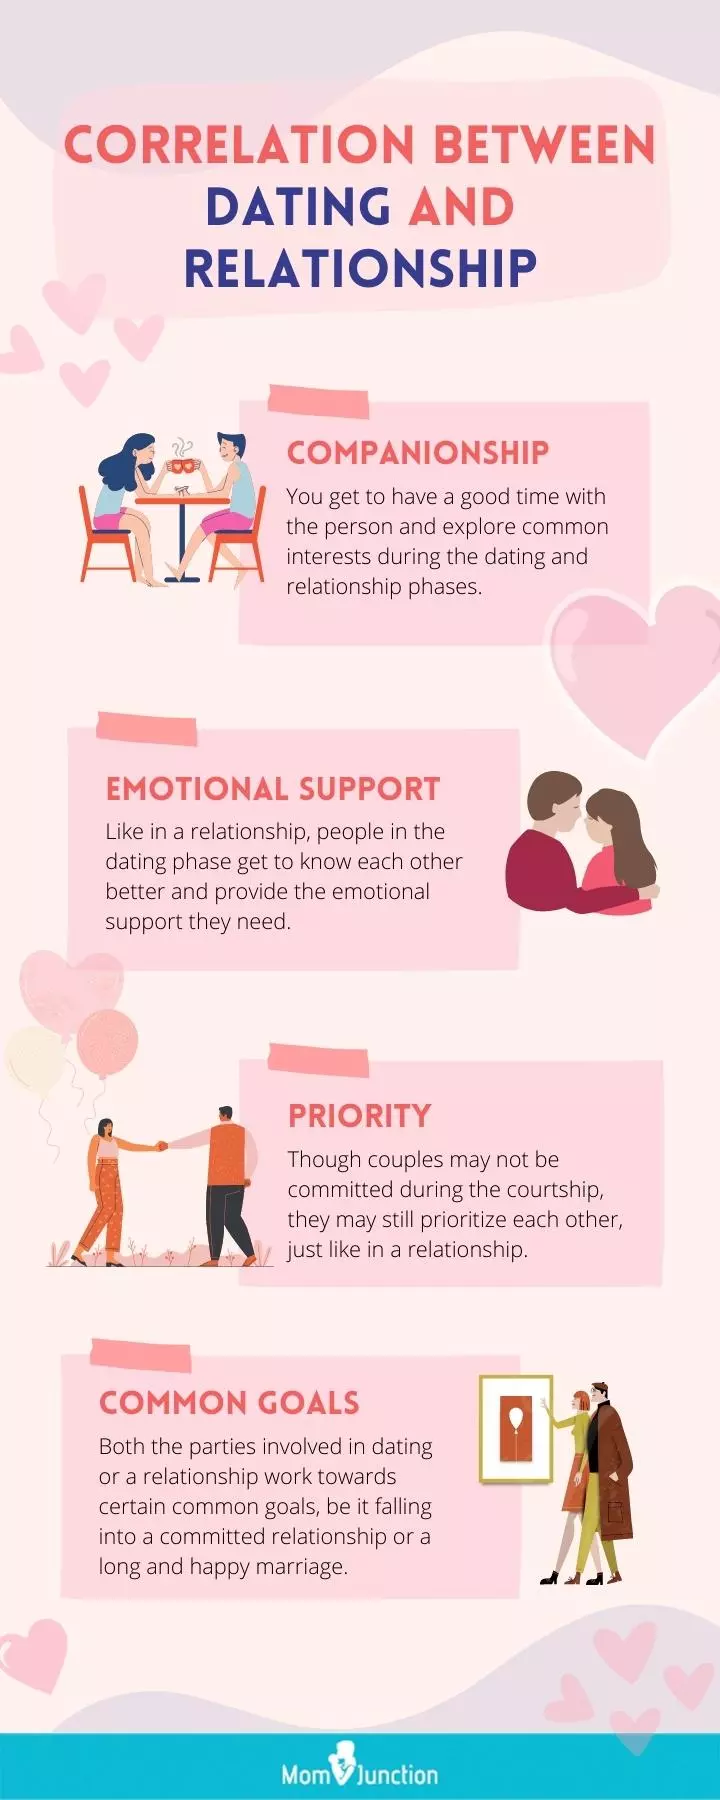 correlation between dating and relationship (infographic)